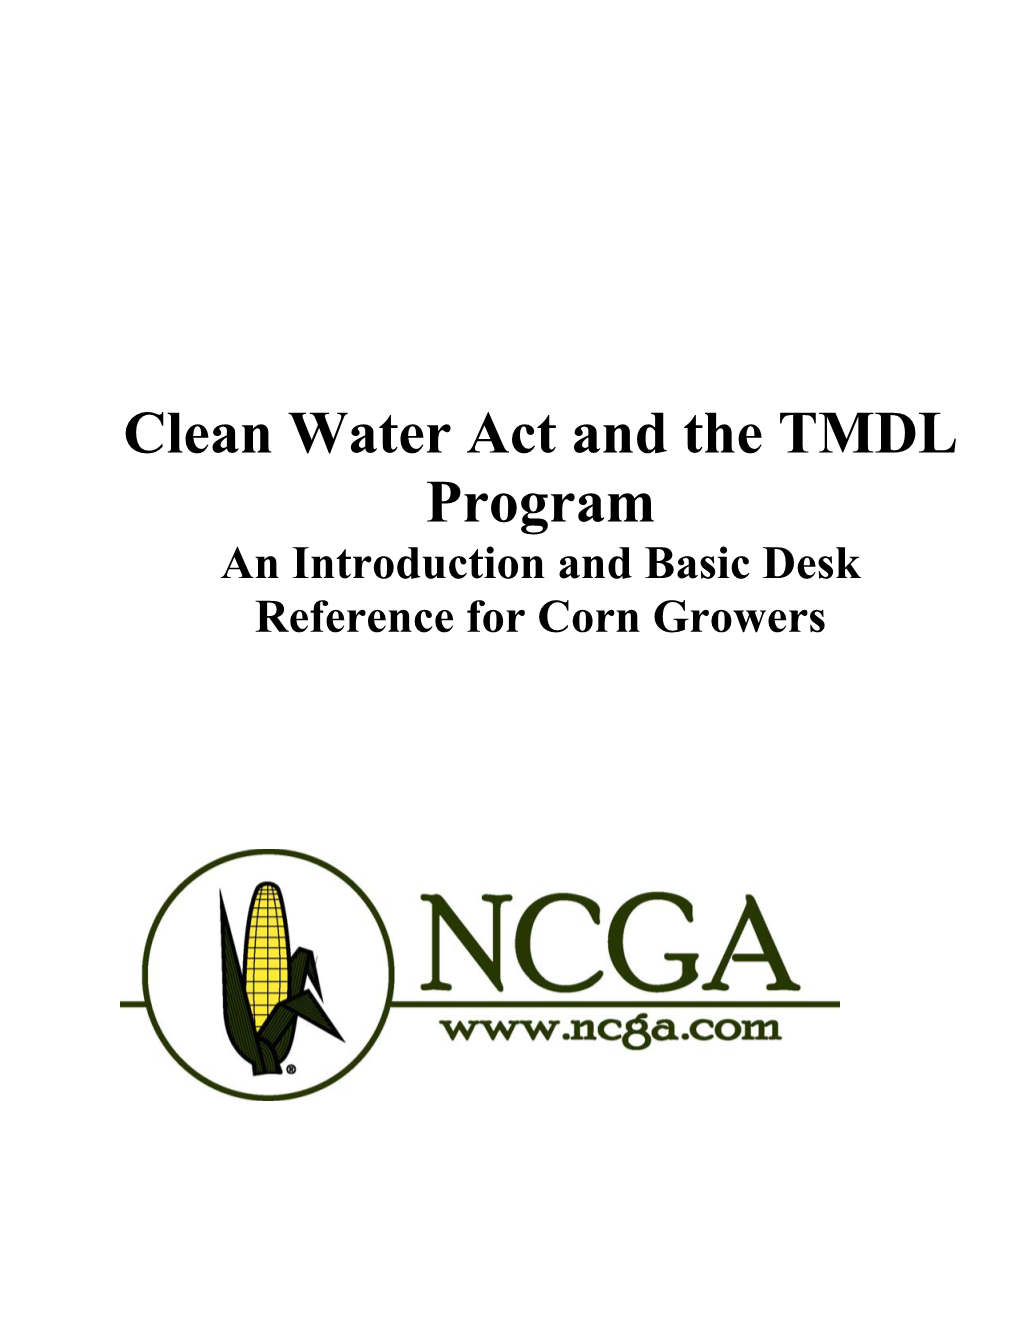 Clean Water Act and the TMDL Program an Introduction and Basic Desk Reference for Corn Growers